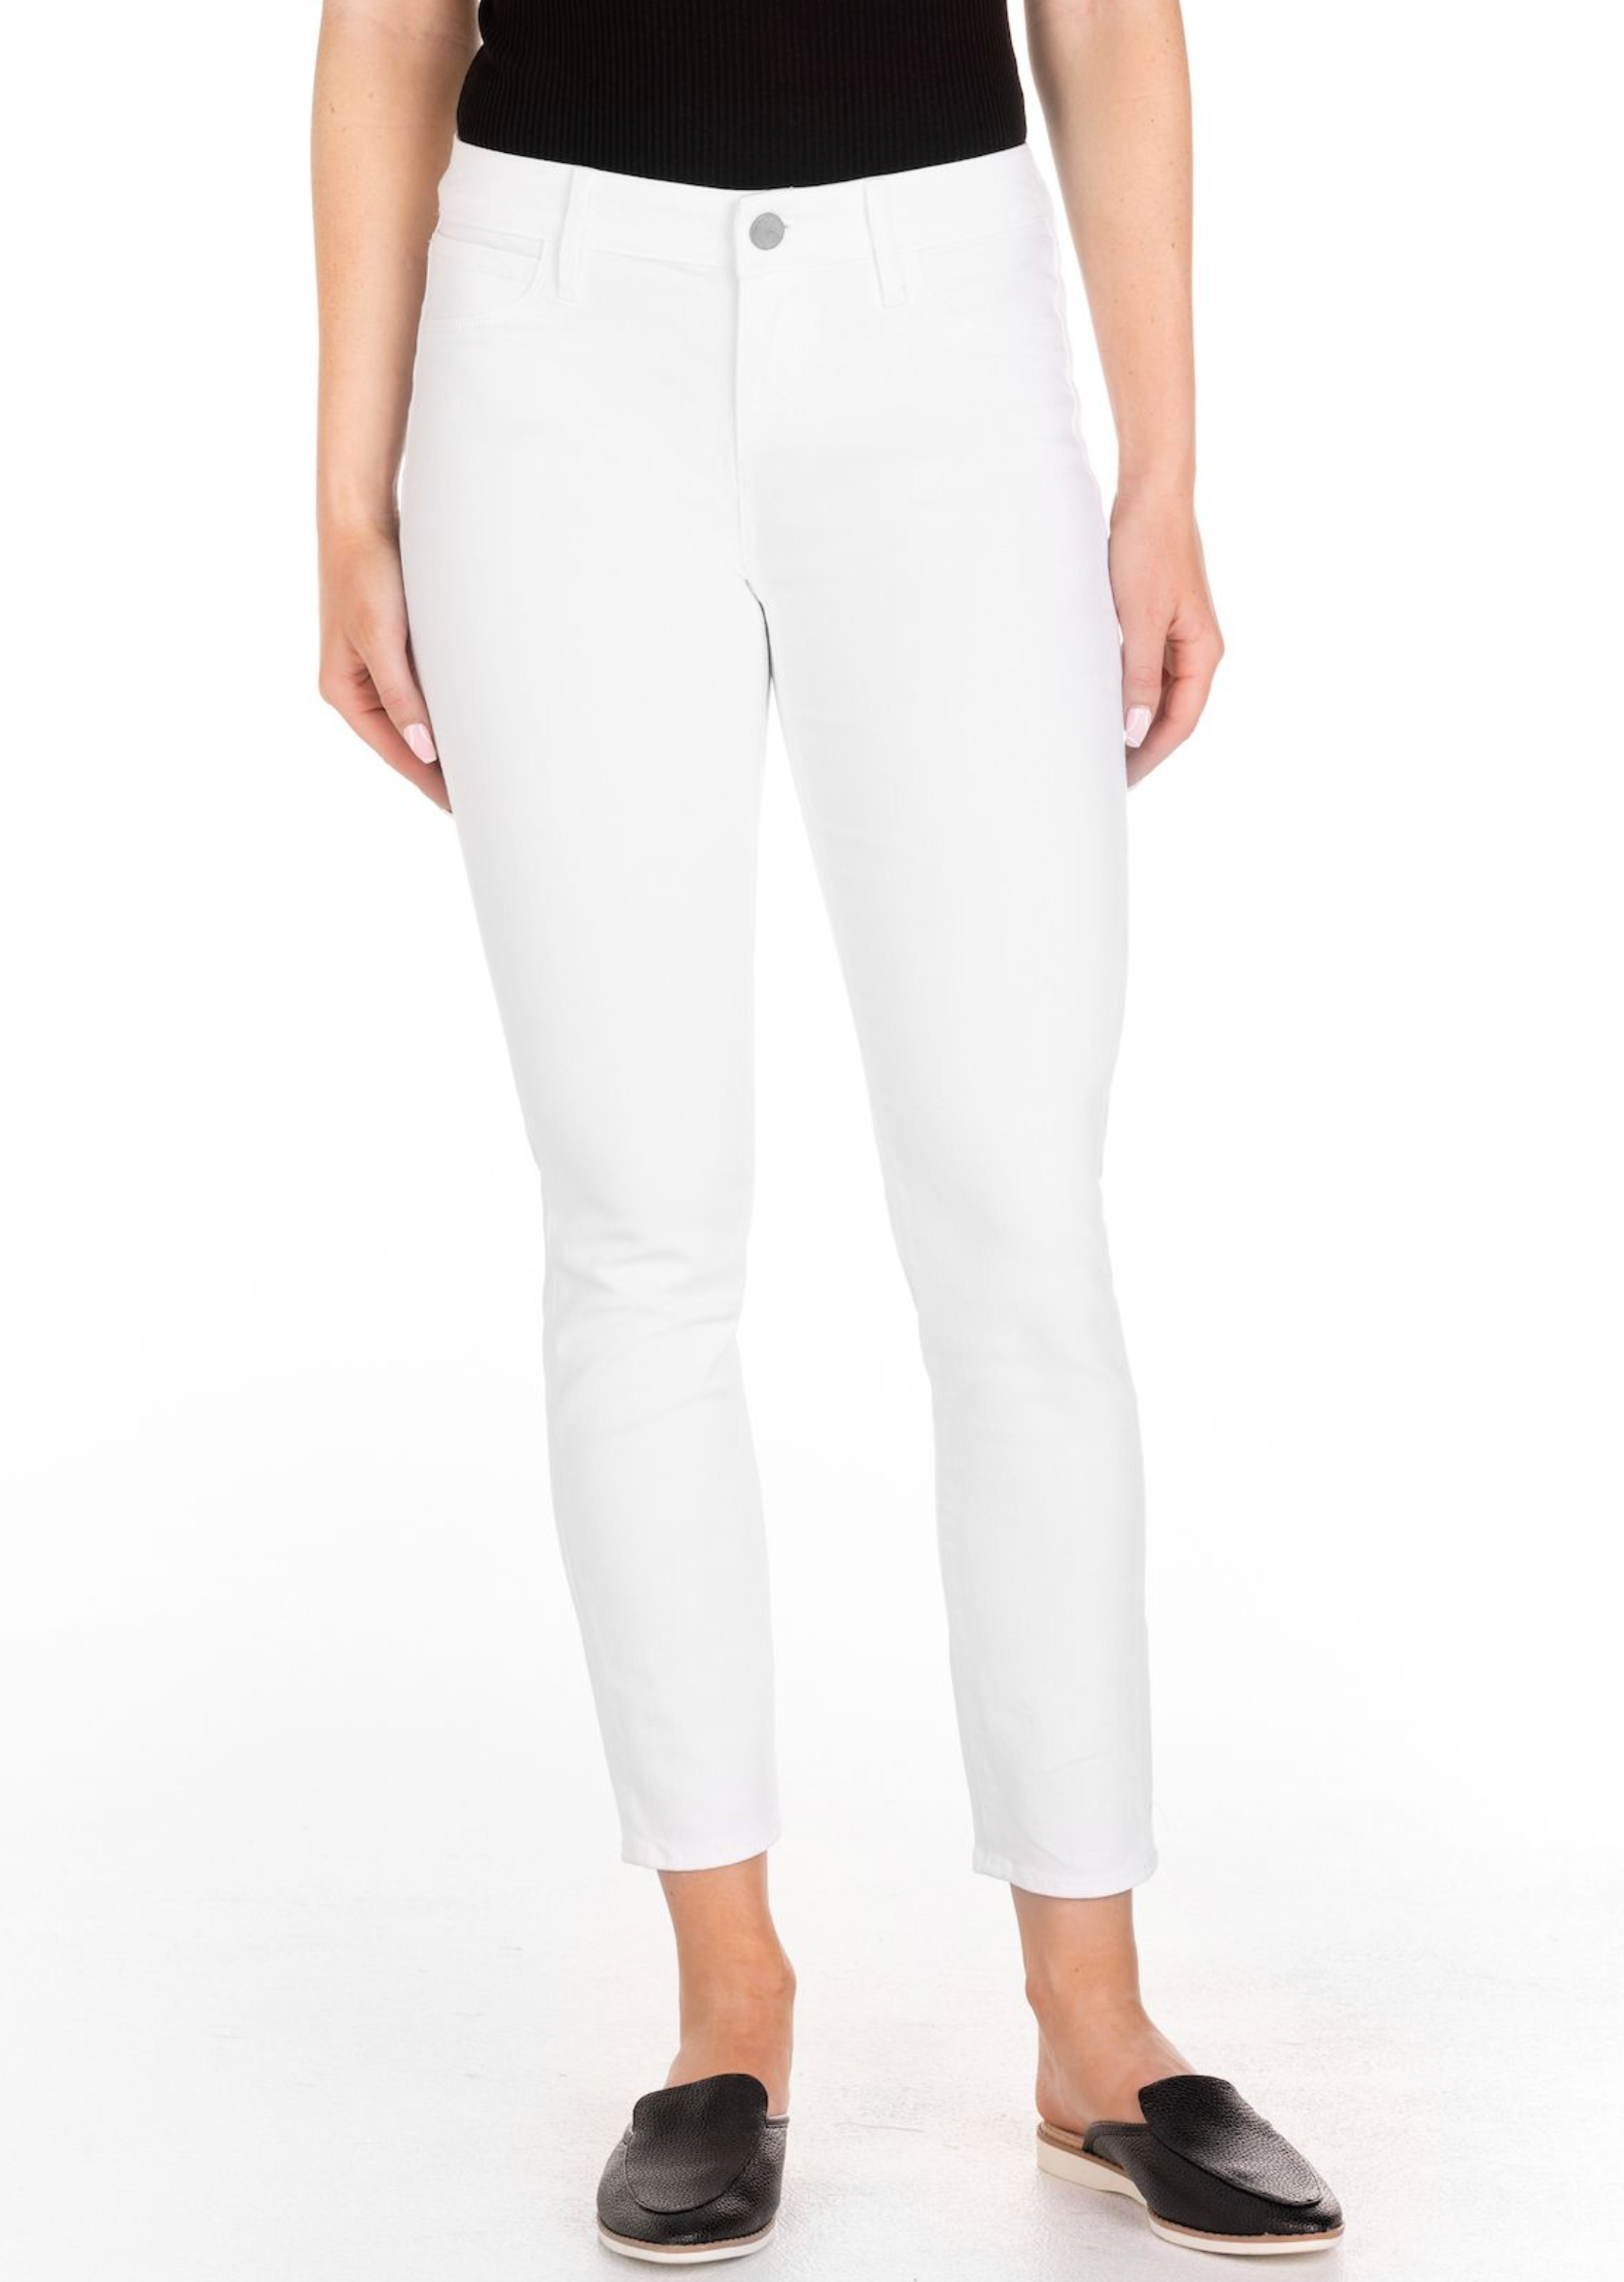 the carly white jean in pearl